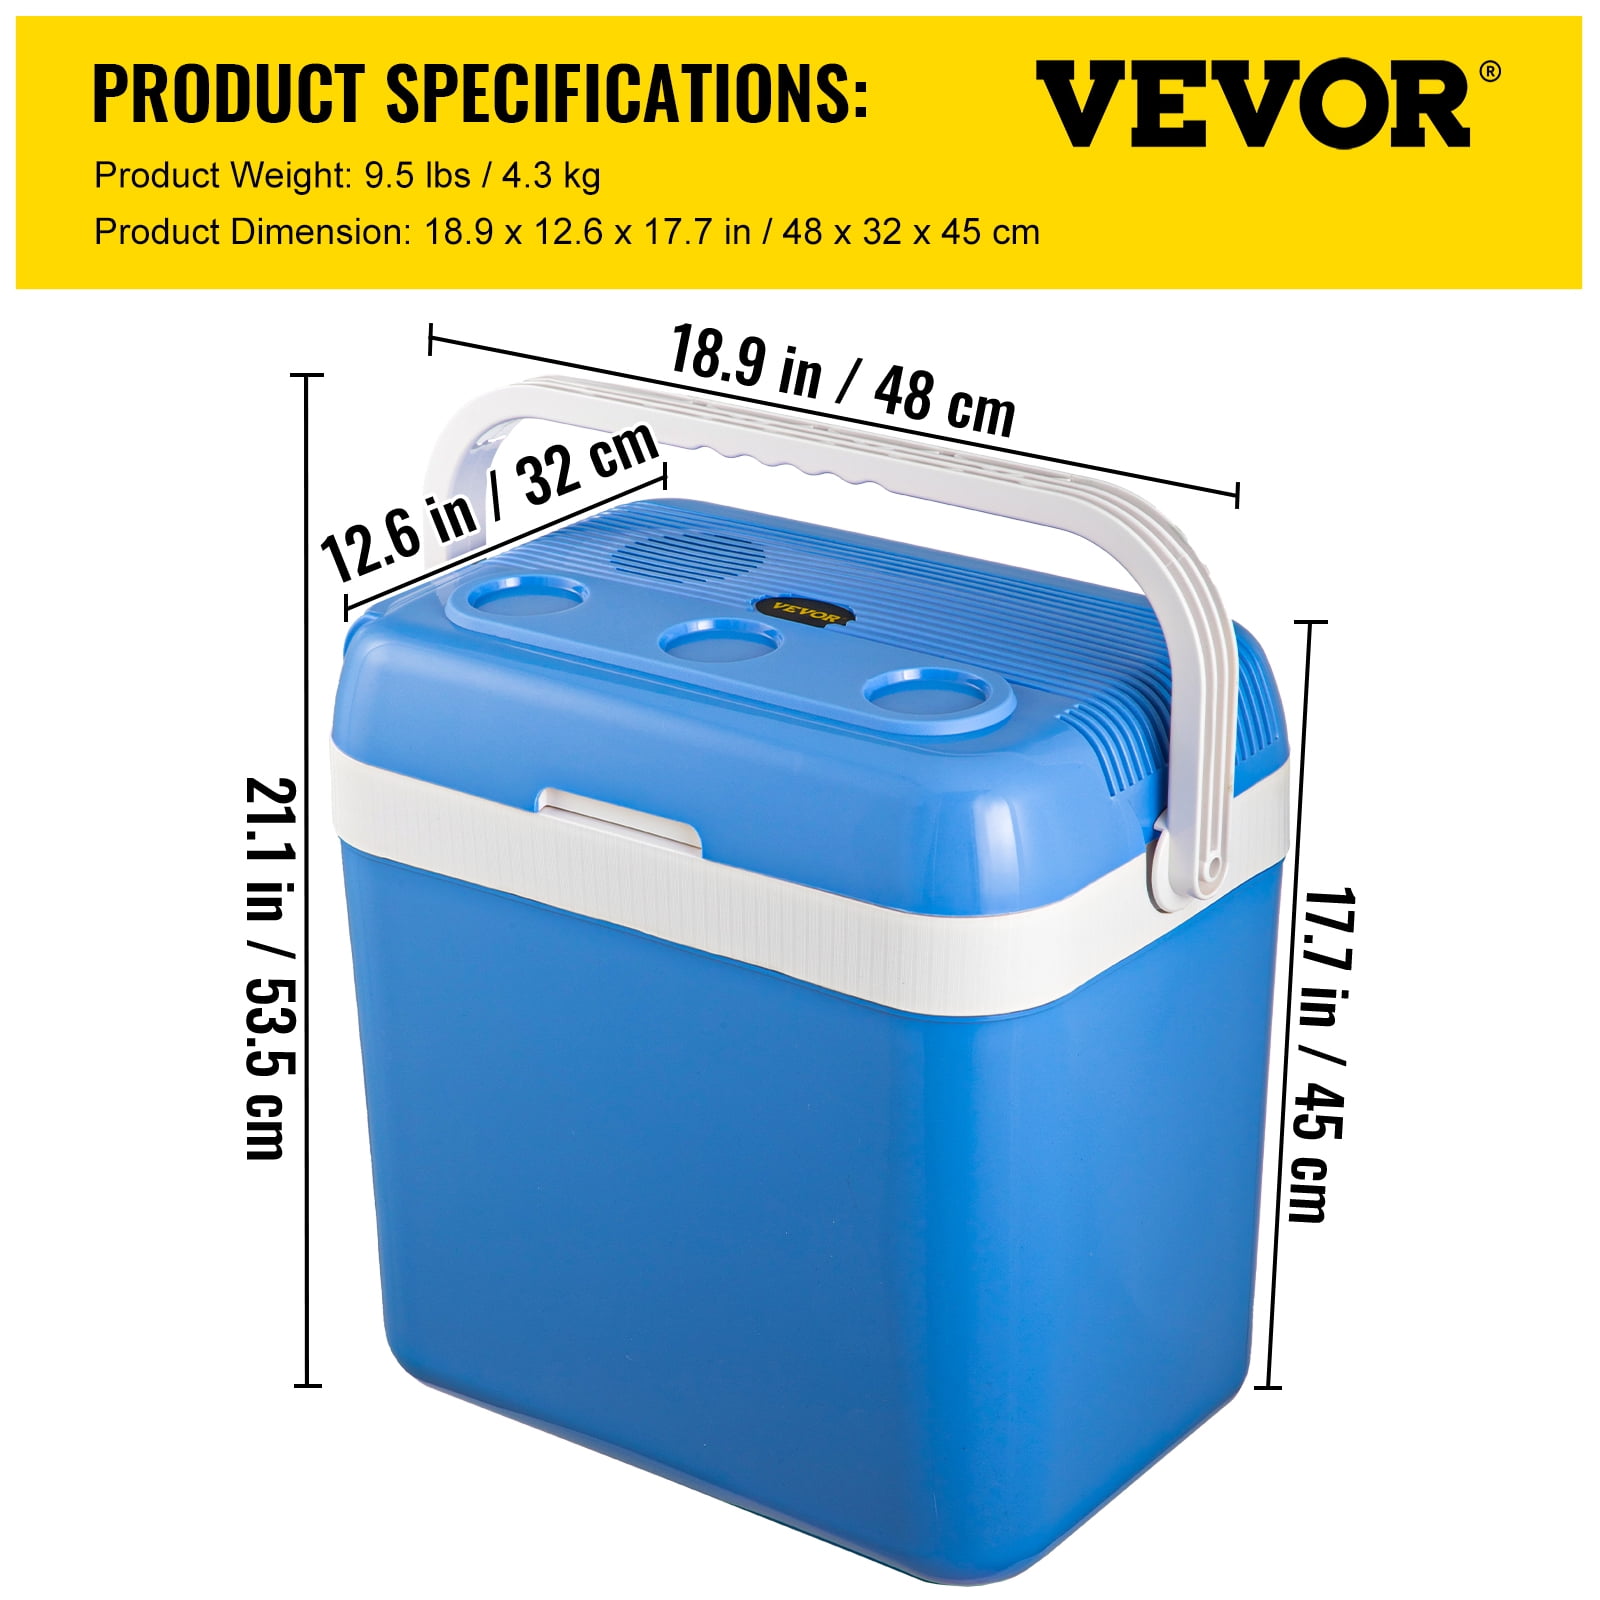 VEVOR Electric Cooler and Warmer, 34 Quart Portable Thermoelectric Fridge,  Plug in Refrigerator with Collapsible Handle, 110V AC Home Power Cord & 12V